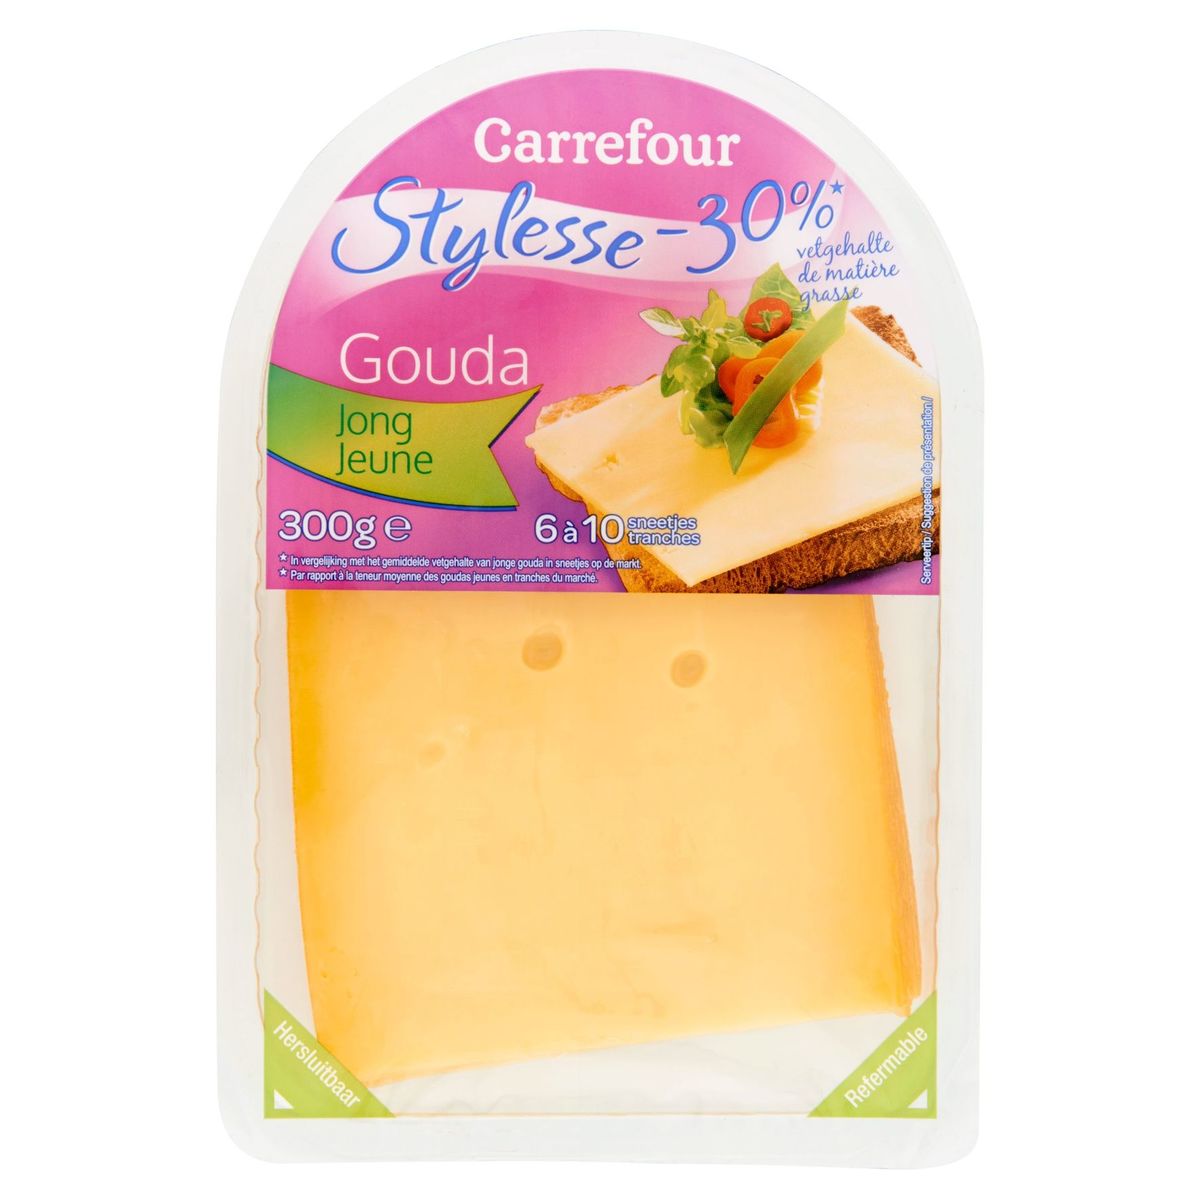 Carrefour Stylesse Gouda Jeune 6 à 10 Tranches 300 g